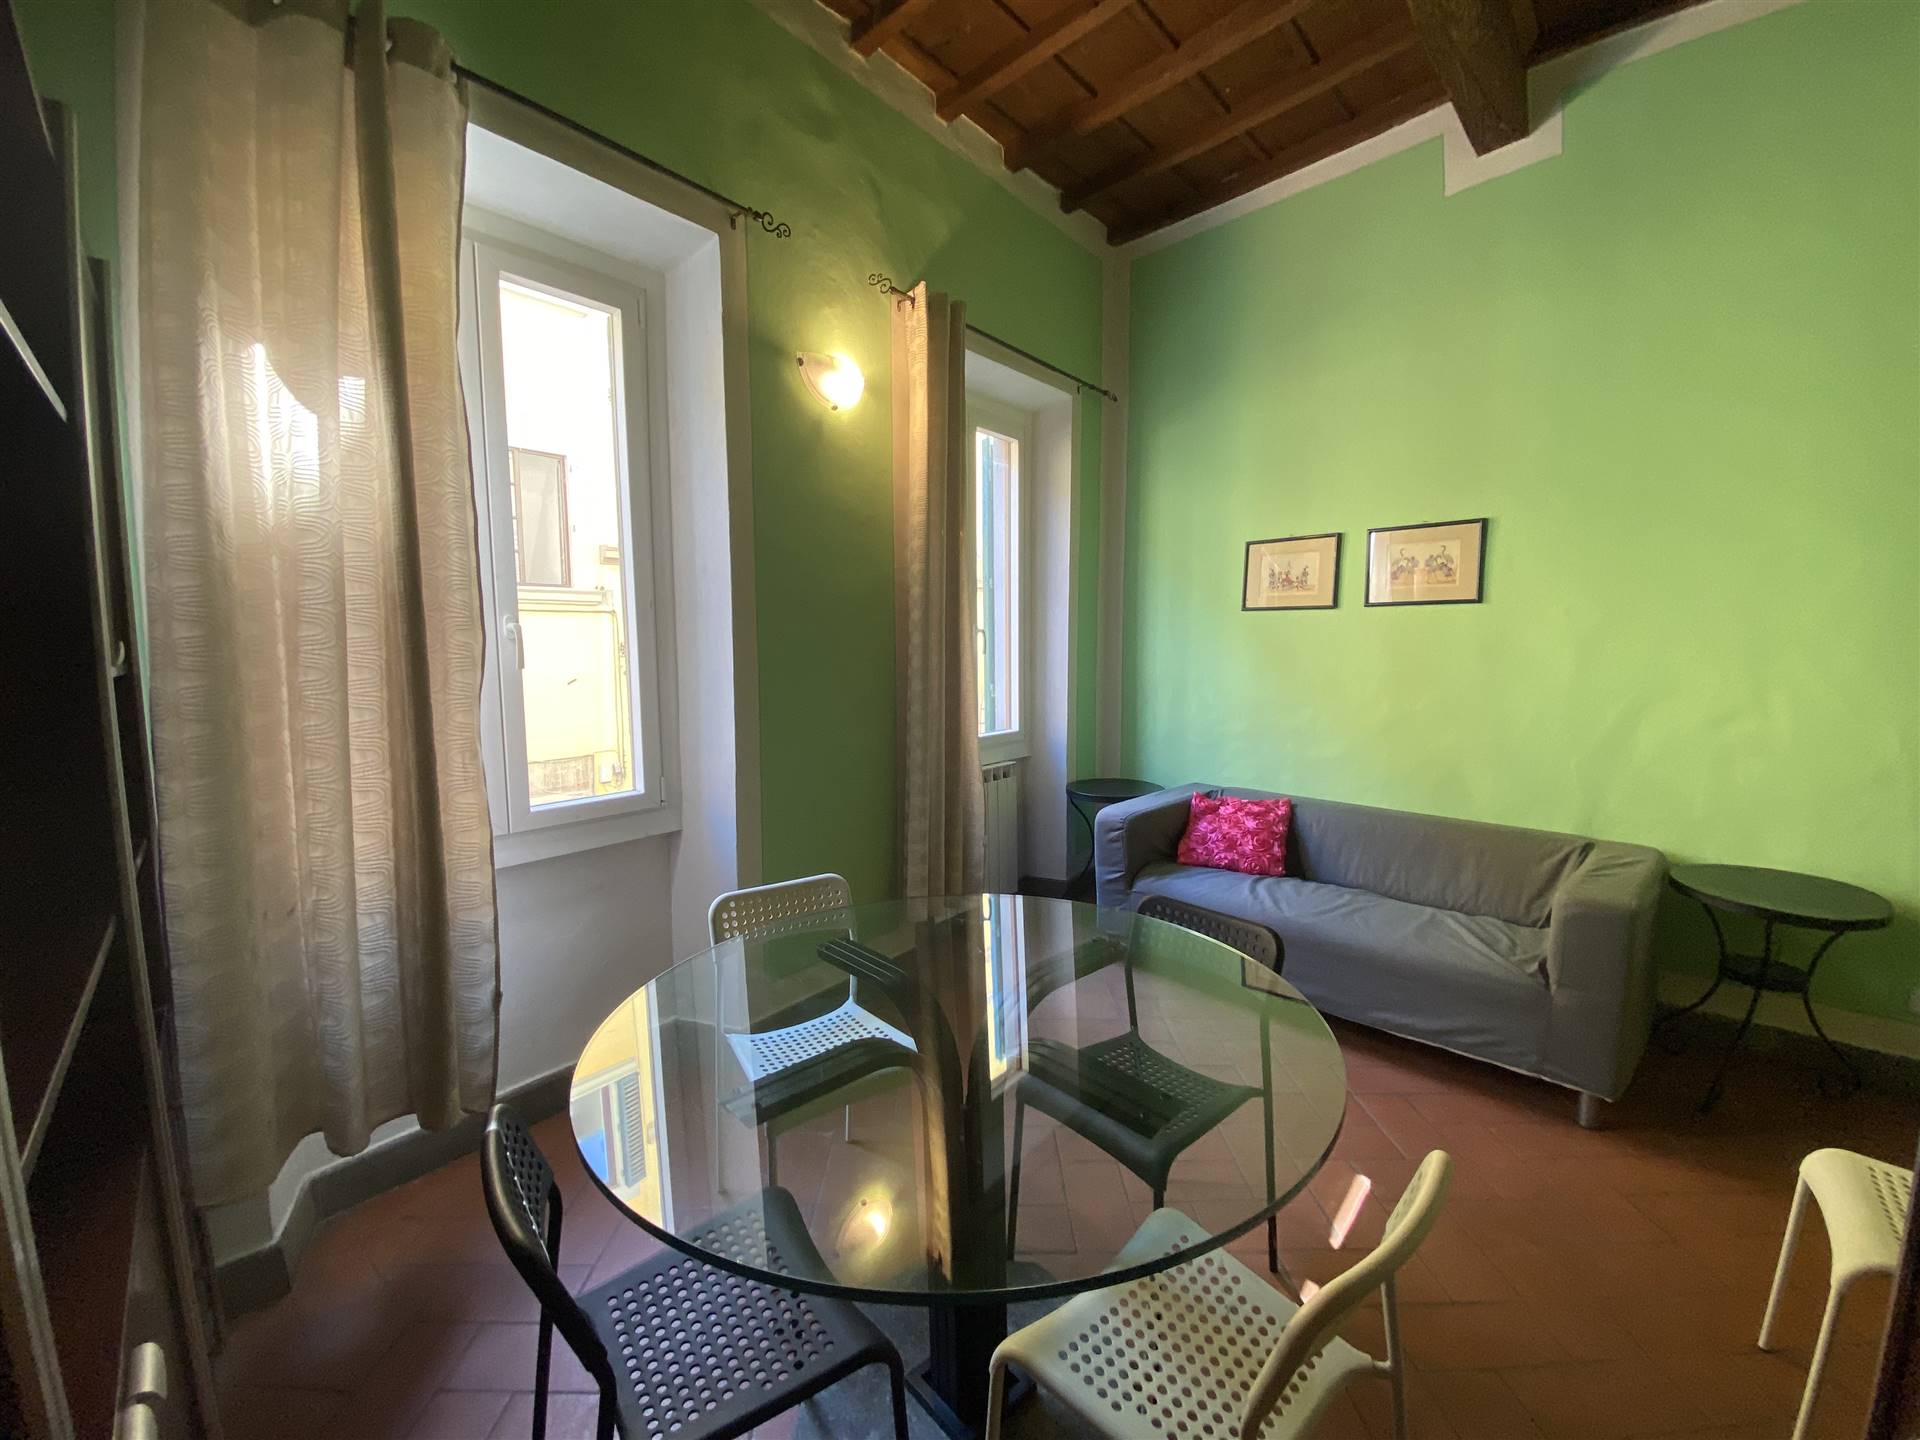 SANTO SPIRITO, FIRENZE, Apartment for sale of 70 Sq. mt., Excellent Condition, Heating Individual heating system, Energetic class: G, Epi: 175 kwh/m2 